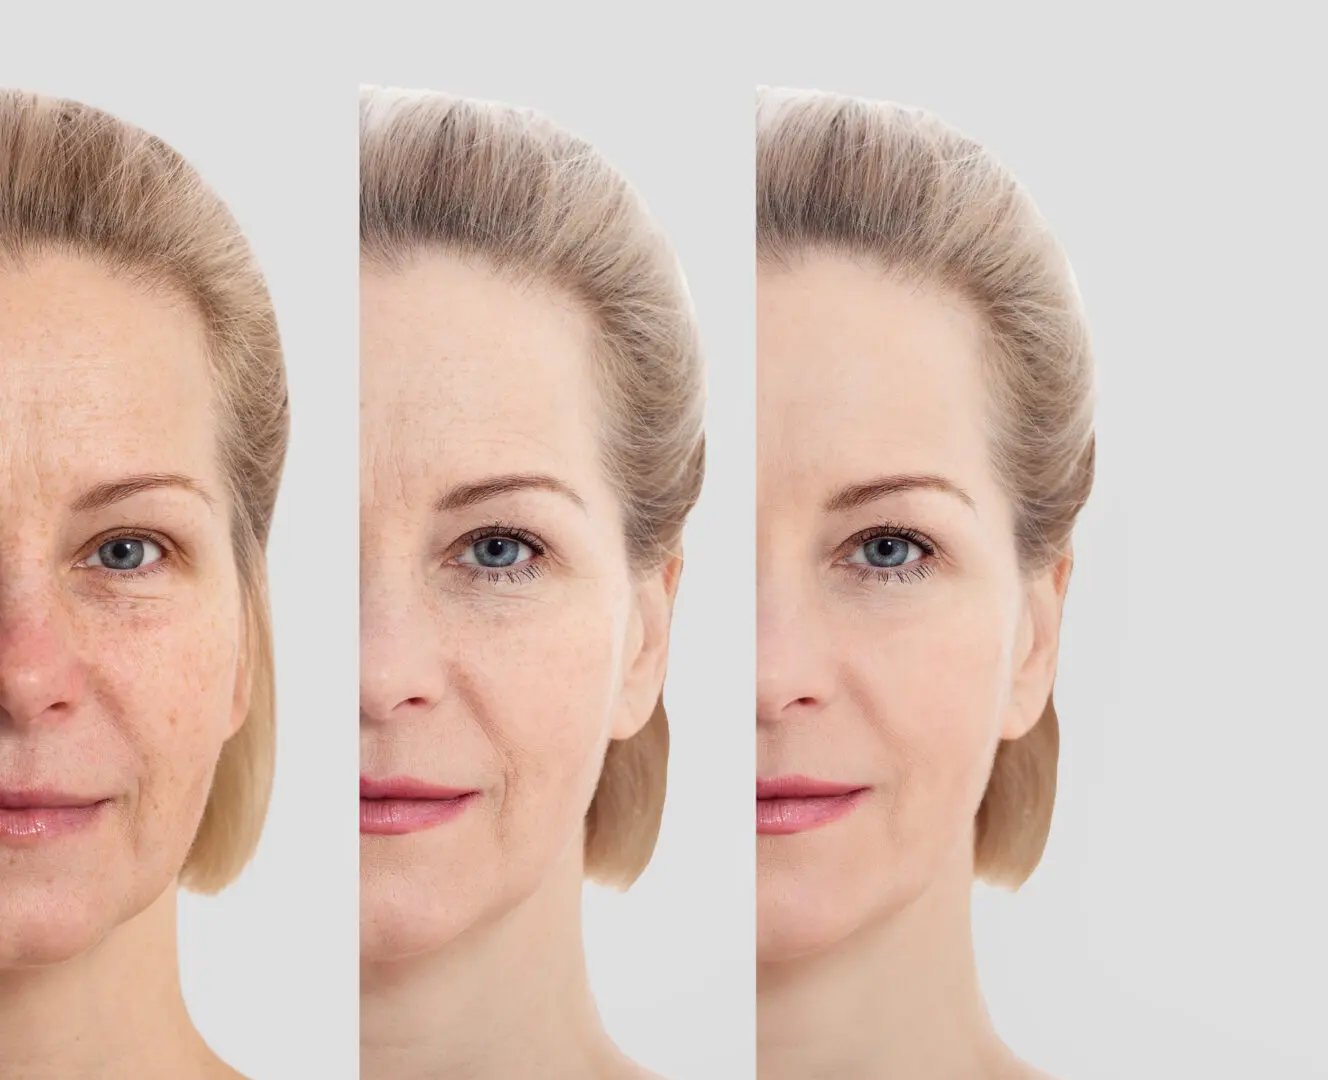 Face without makeup. Middle age close up woman face before after cosmetic. Skin care for wrinkled face. Before after anti aging facelift treatment. Facial skincare and contouring.